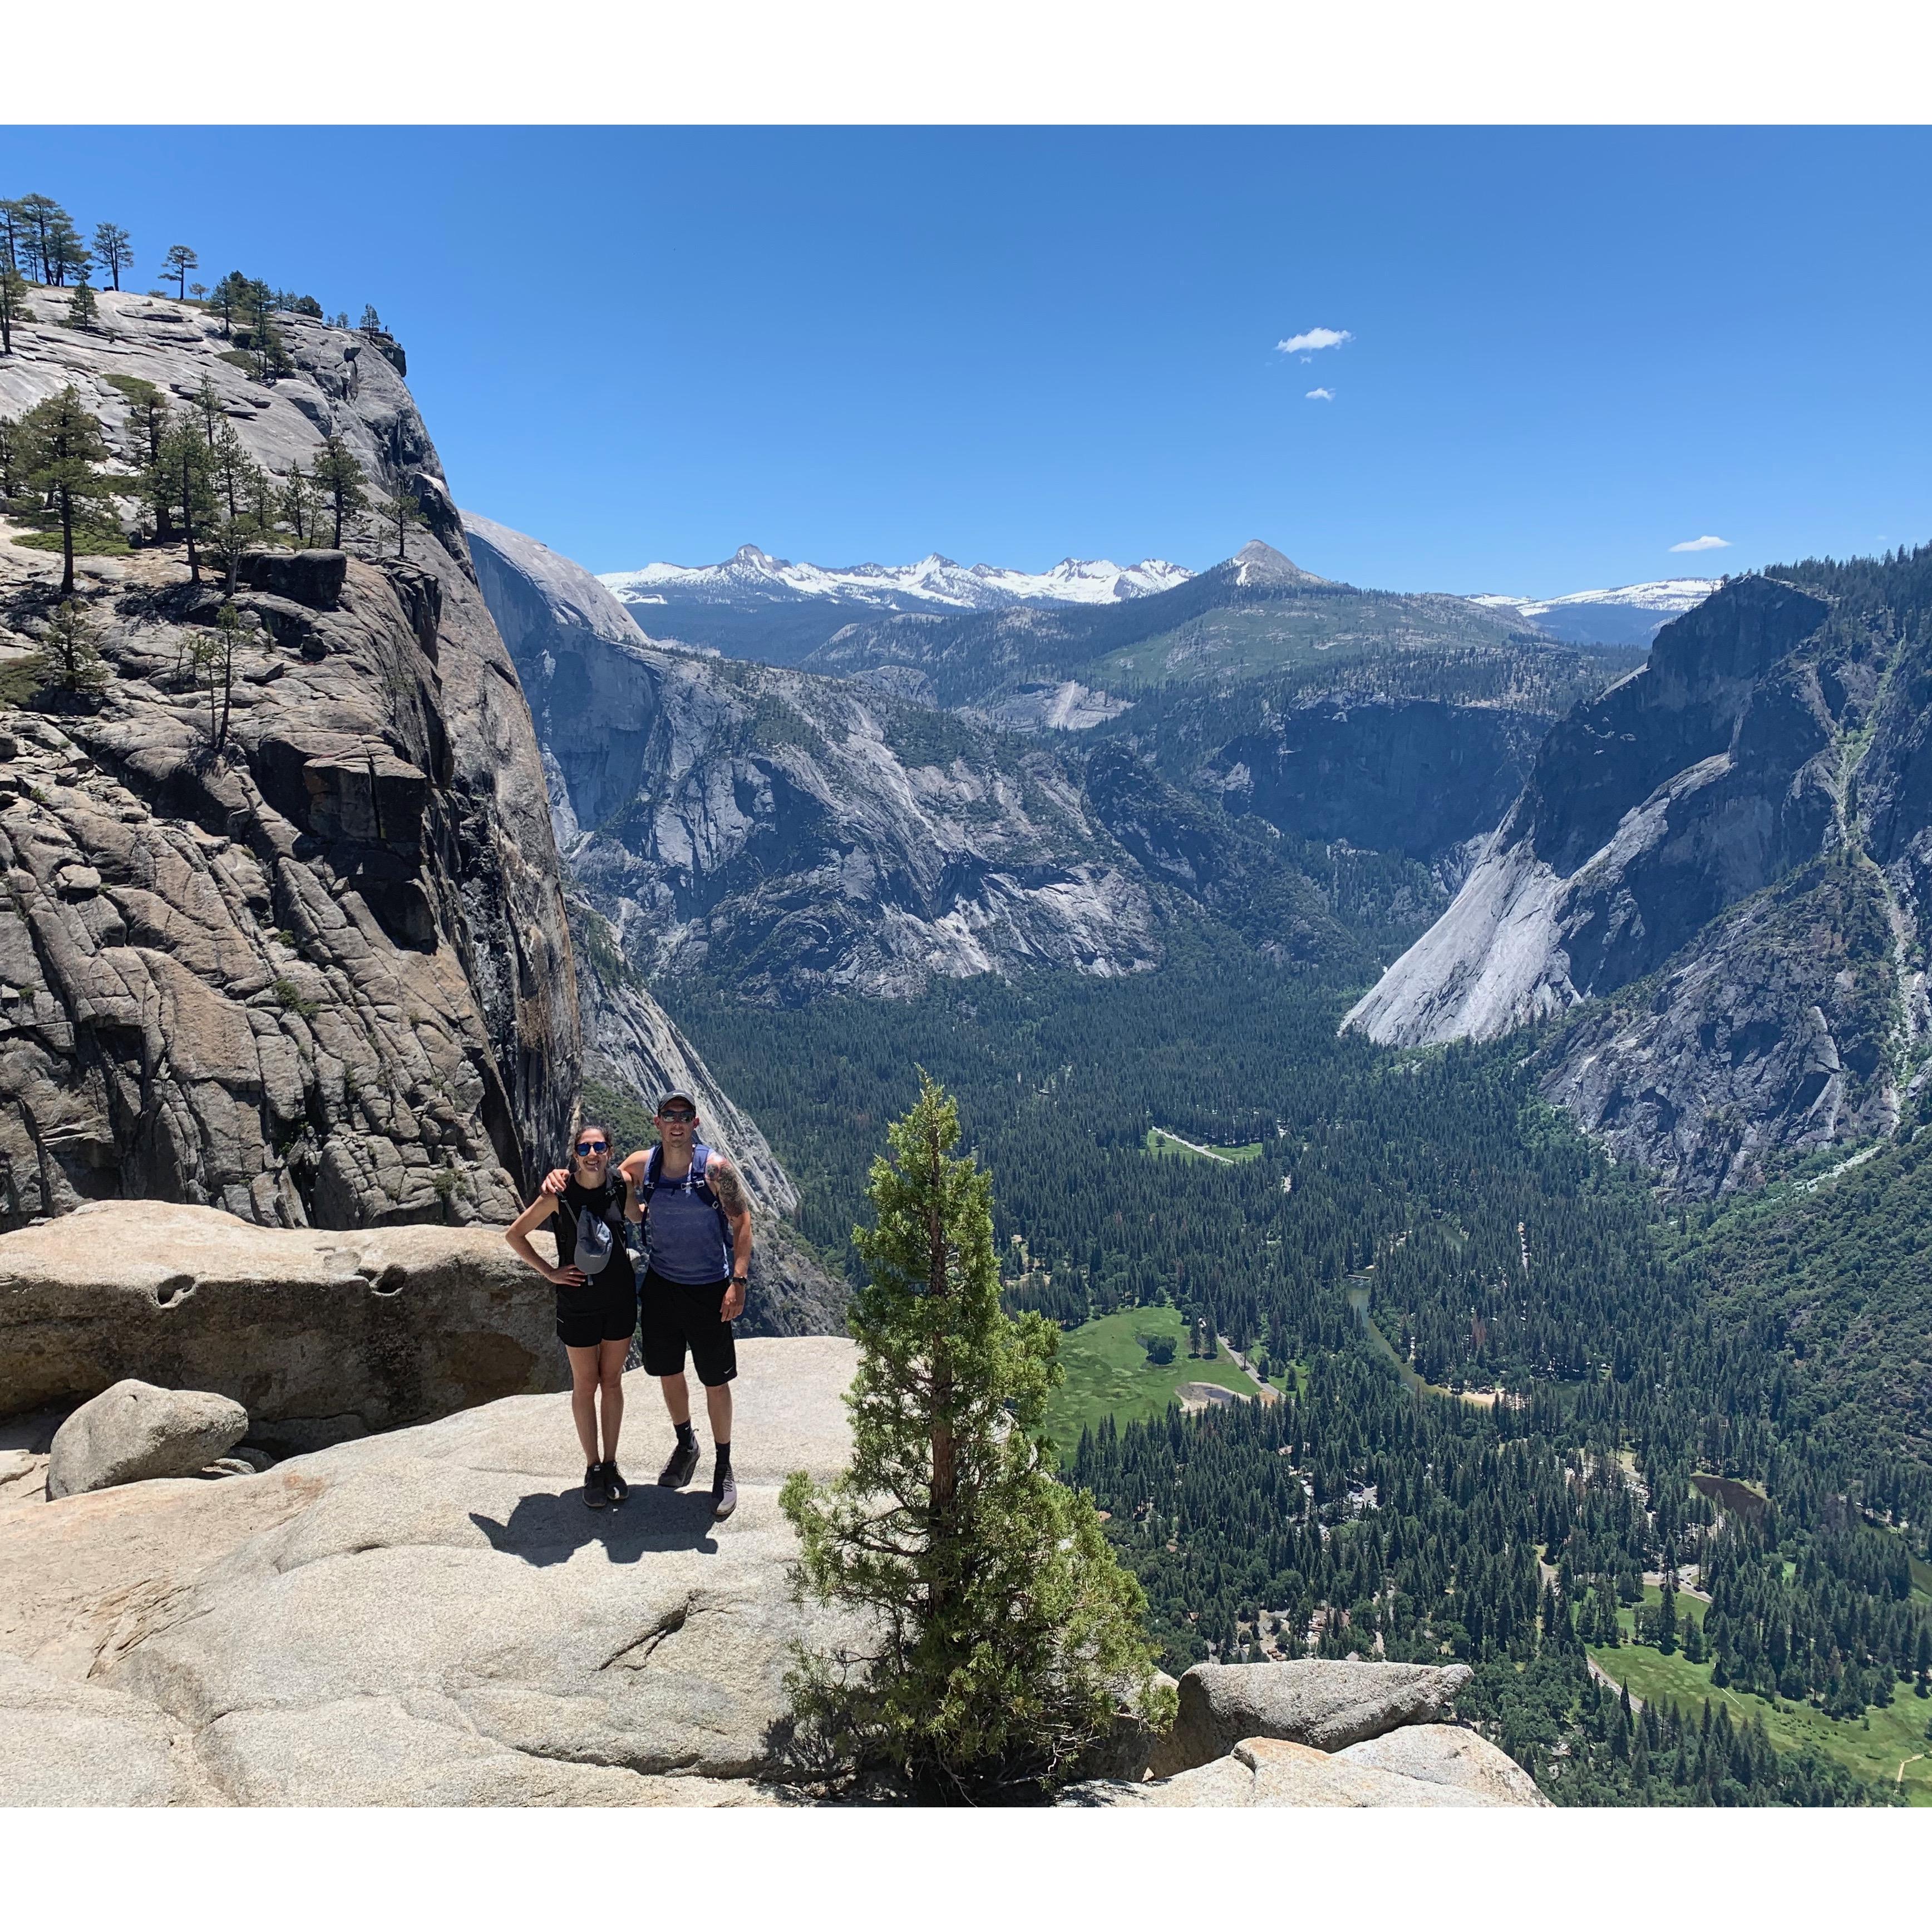 Our Trip to Yosemite in 2019